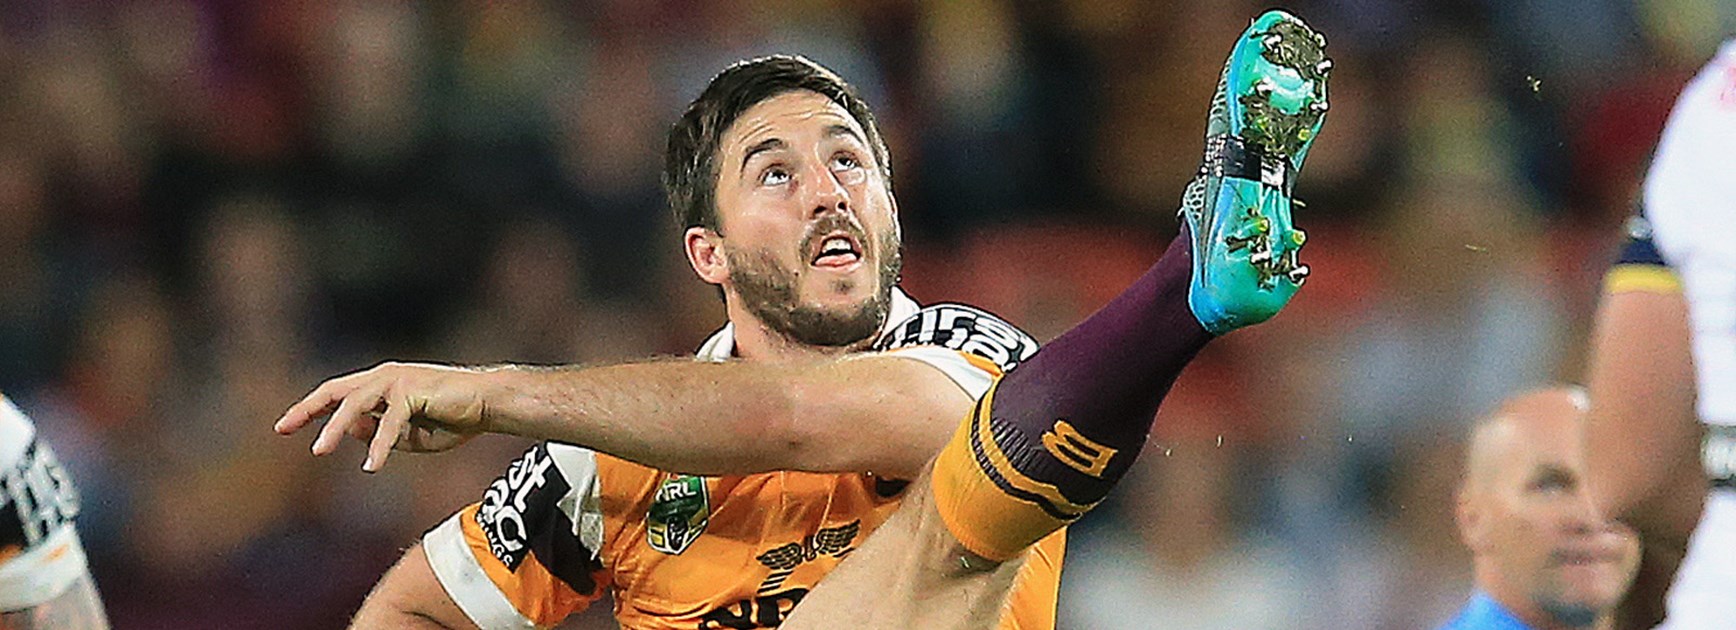 Broncos halfback Ben Hunt will watch Friday's semi-final between the Bulldogs and Roosters closely.